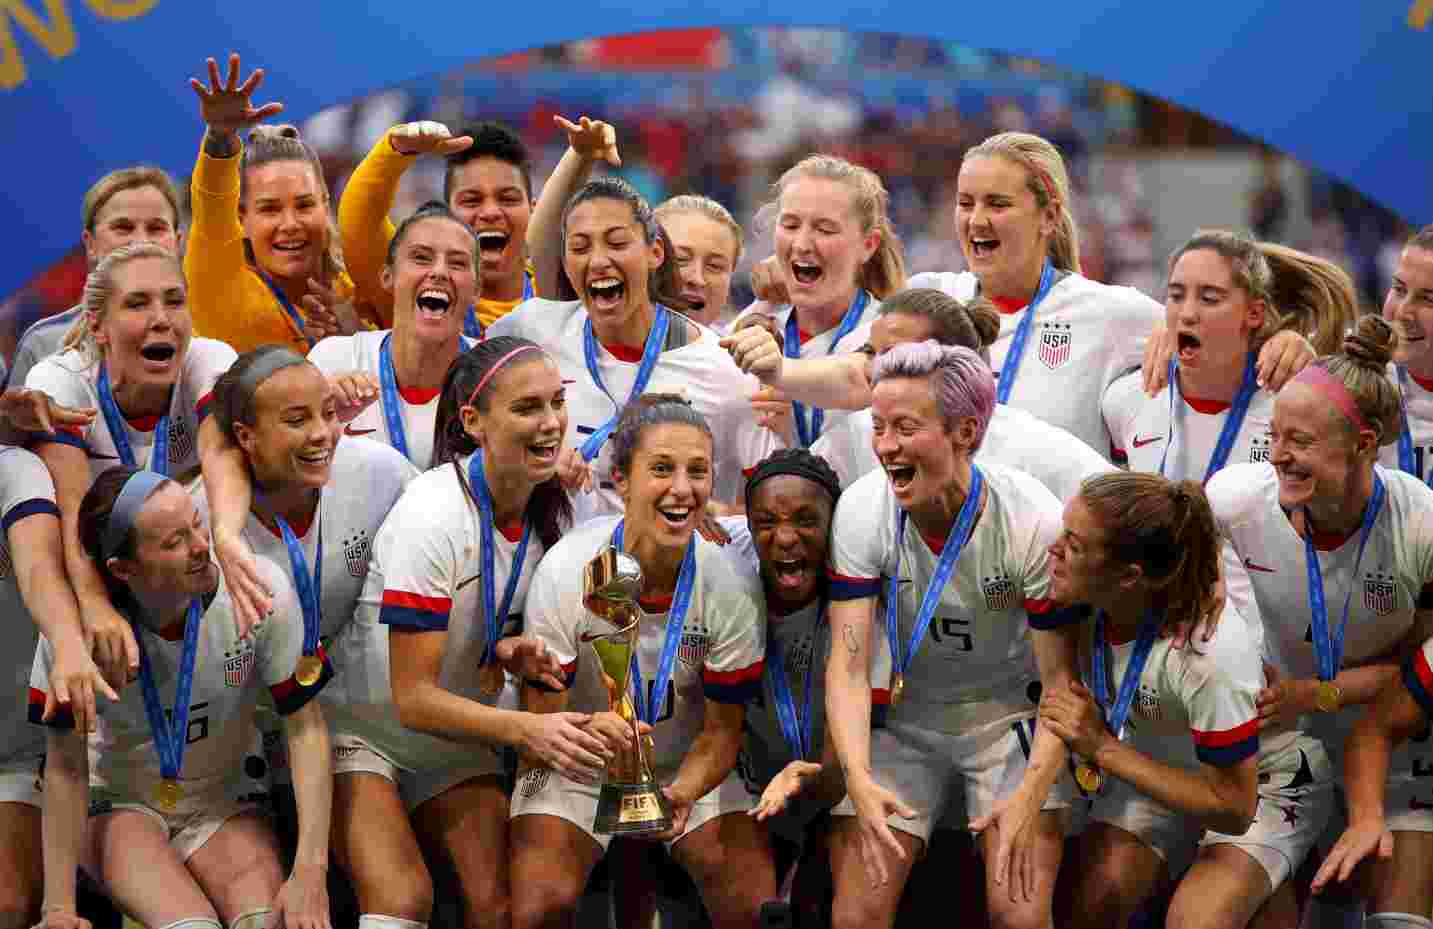 Where will the FIFA Women's World Cup be held in 2027